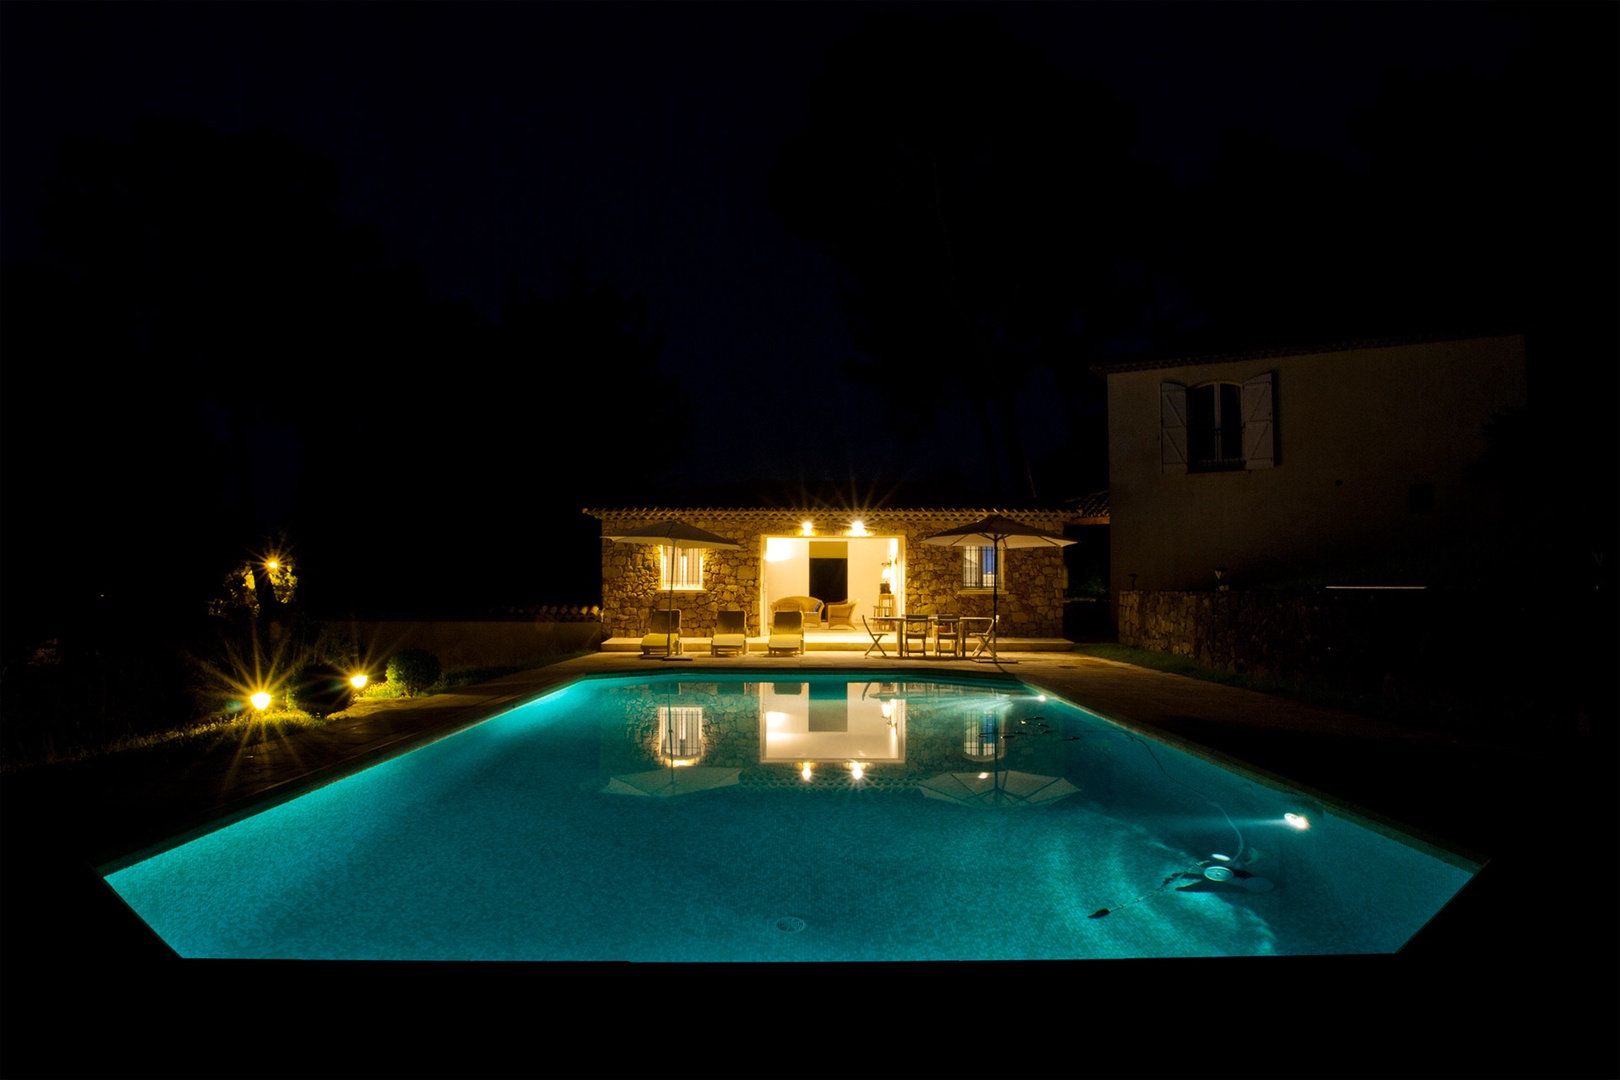 Enjoy a nighttime view of the pool